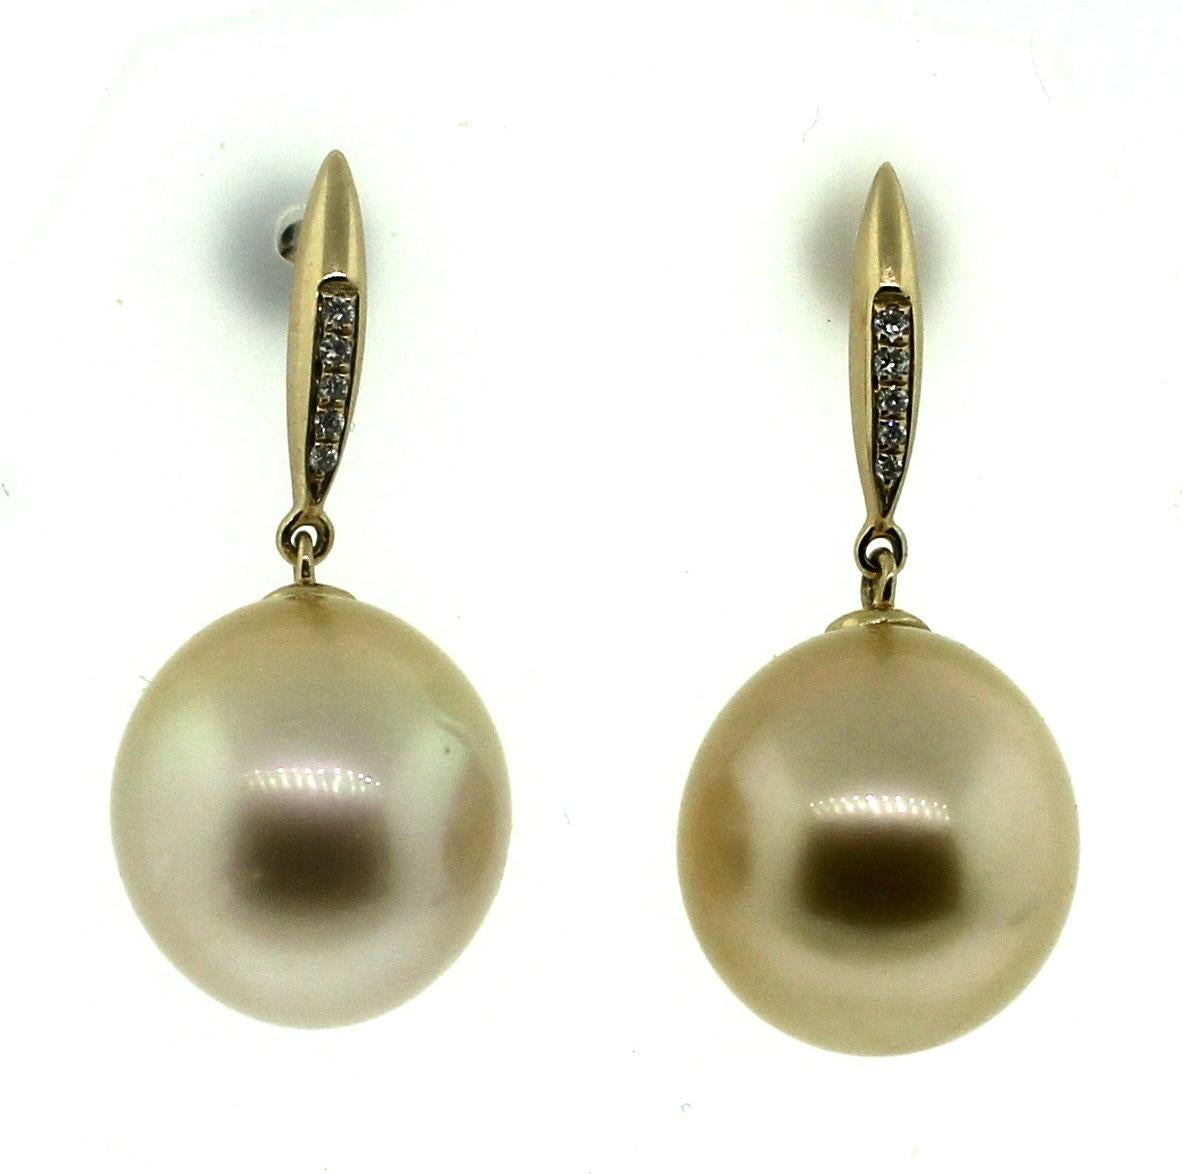 Hakimoto By Jewel Of Ocean
18K White Gold And Diamonds
Natural Color Drop Cultured Pearl Earrings.
Total item weight 7.1 grams
12x13.5 mm Natural color South Sea Drop Cultured Pearls
18K White Gold High Polish
Orient: Very Good
Luster: Very